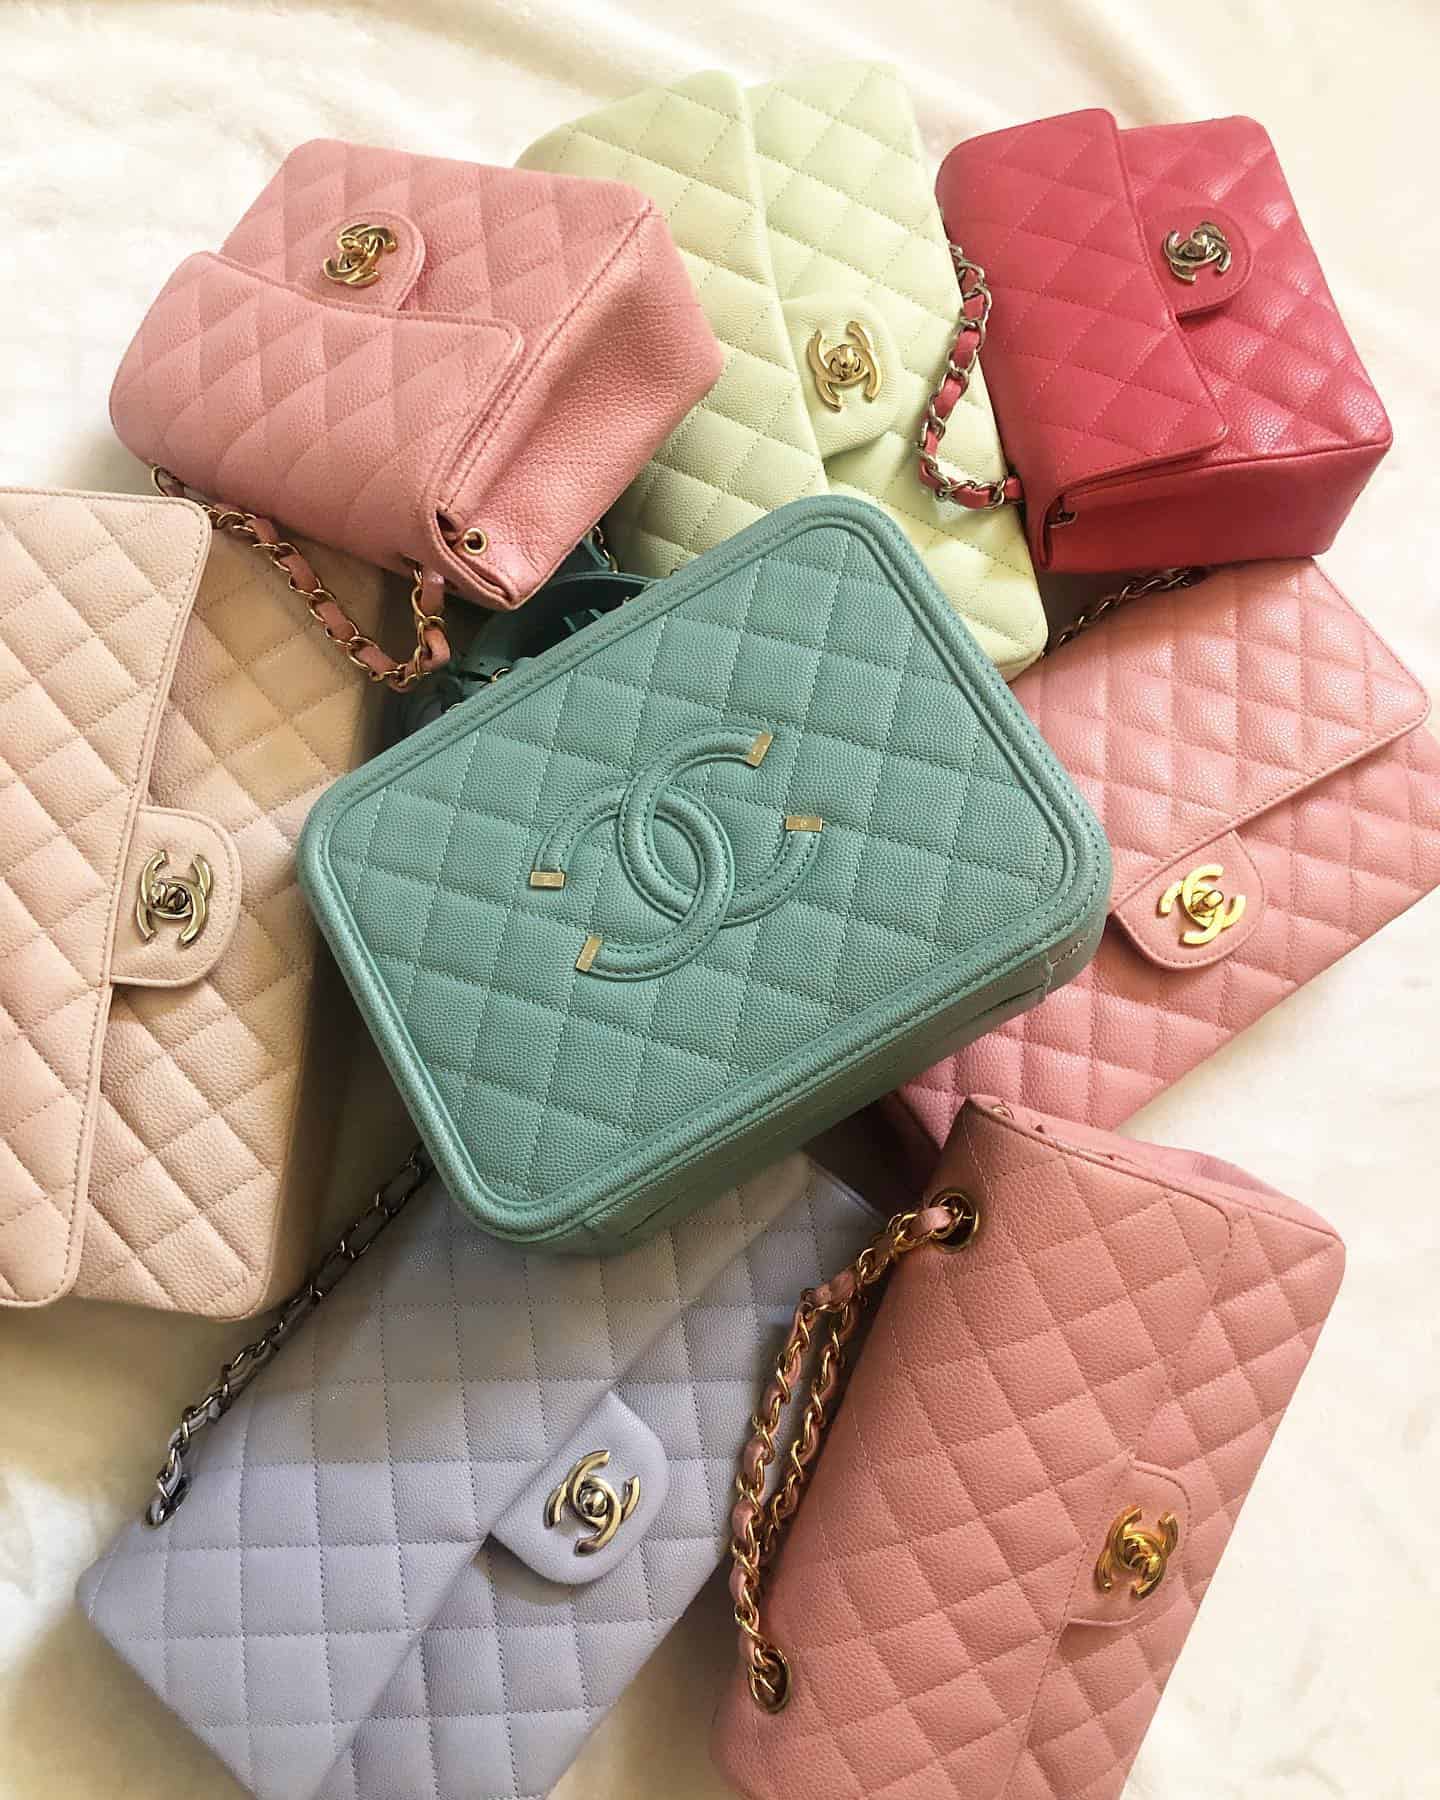 Many Color Chanel bags Chanel price increase list in Europe